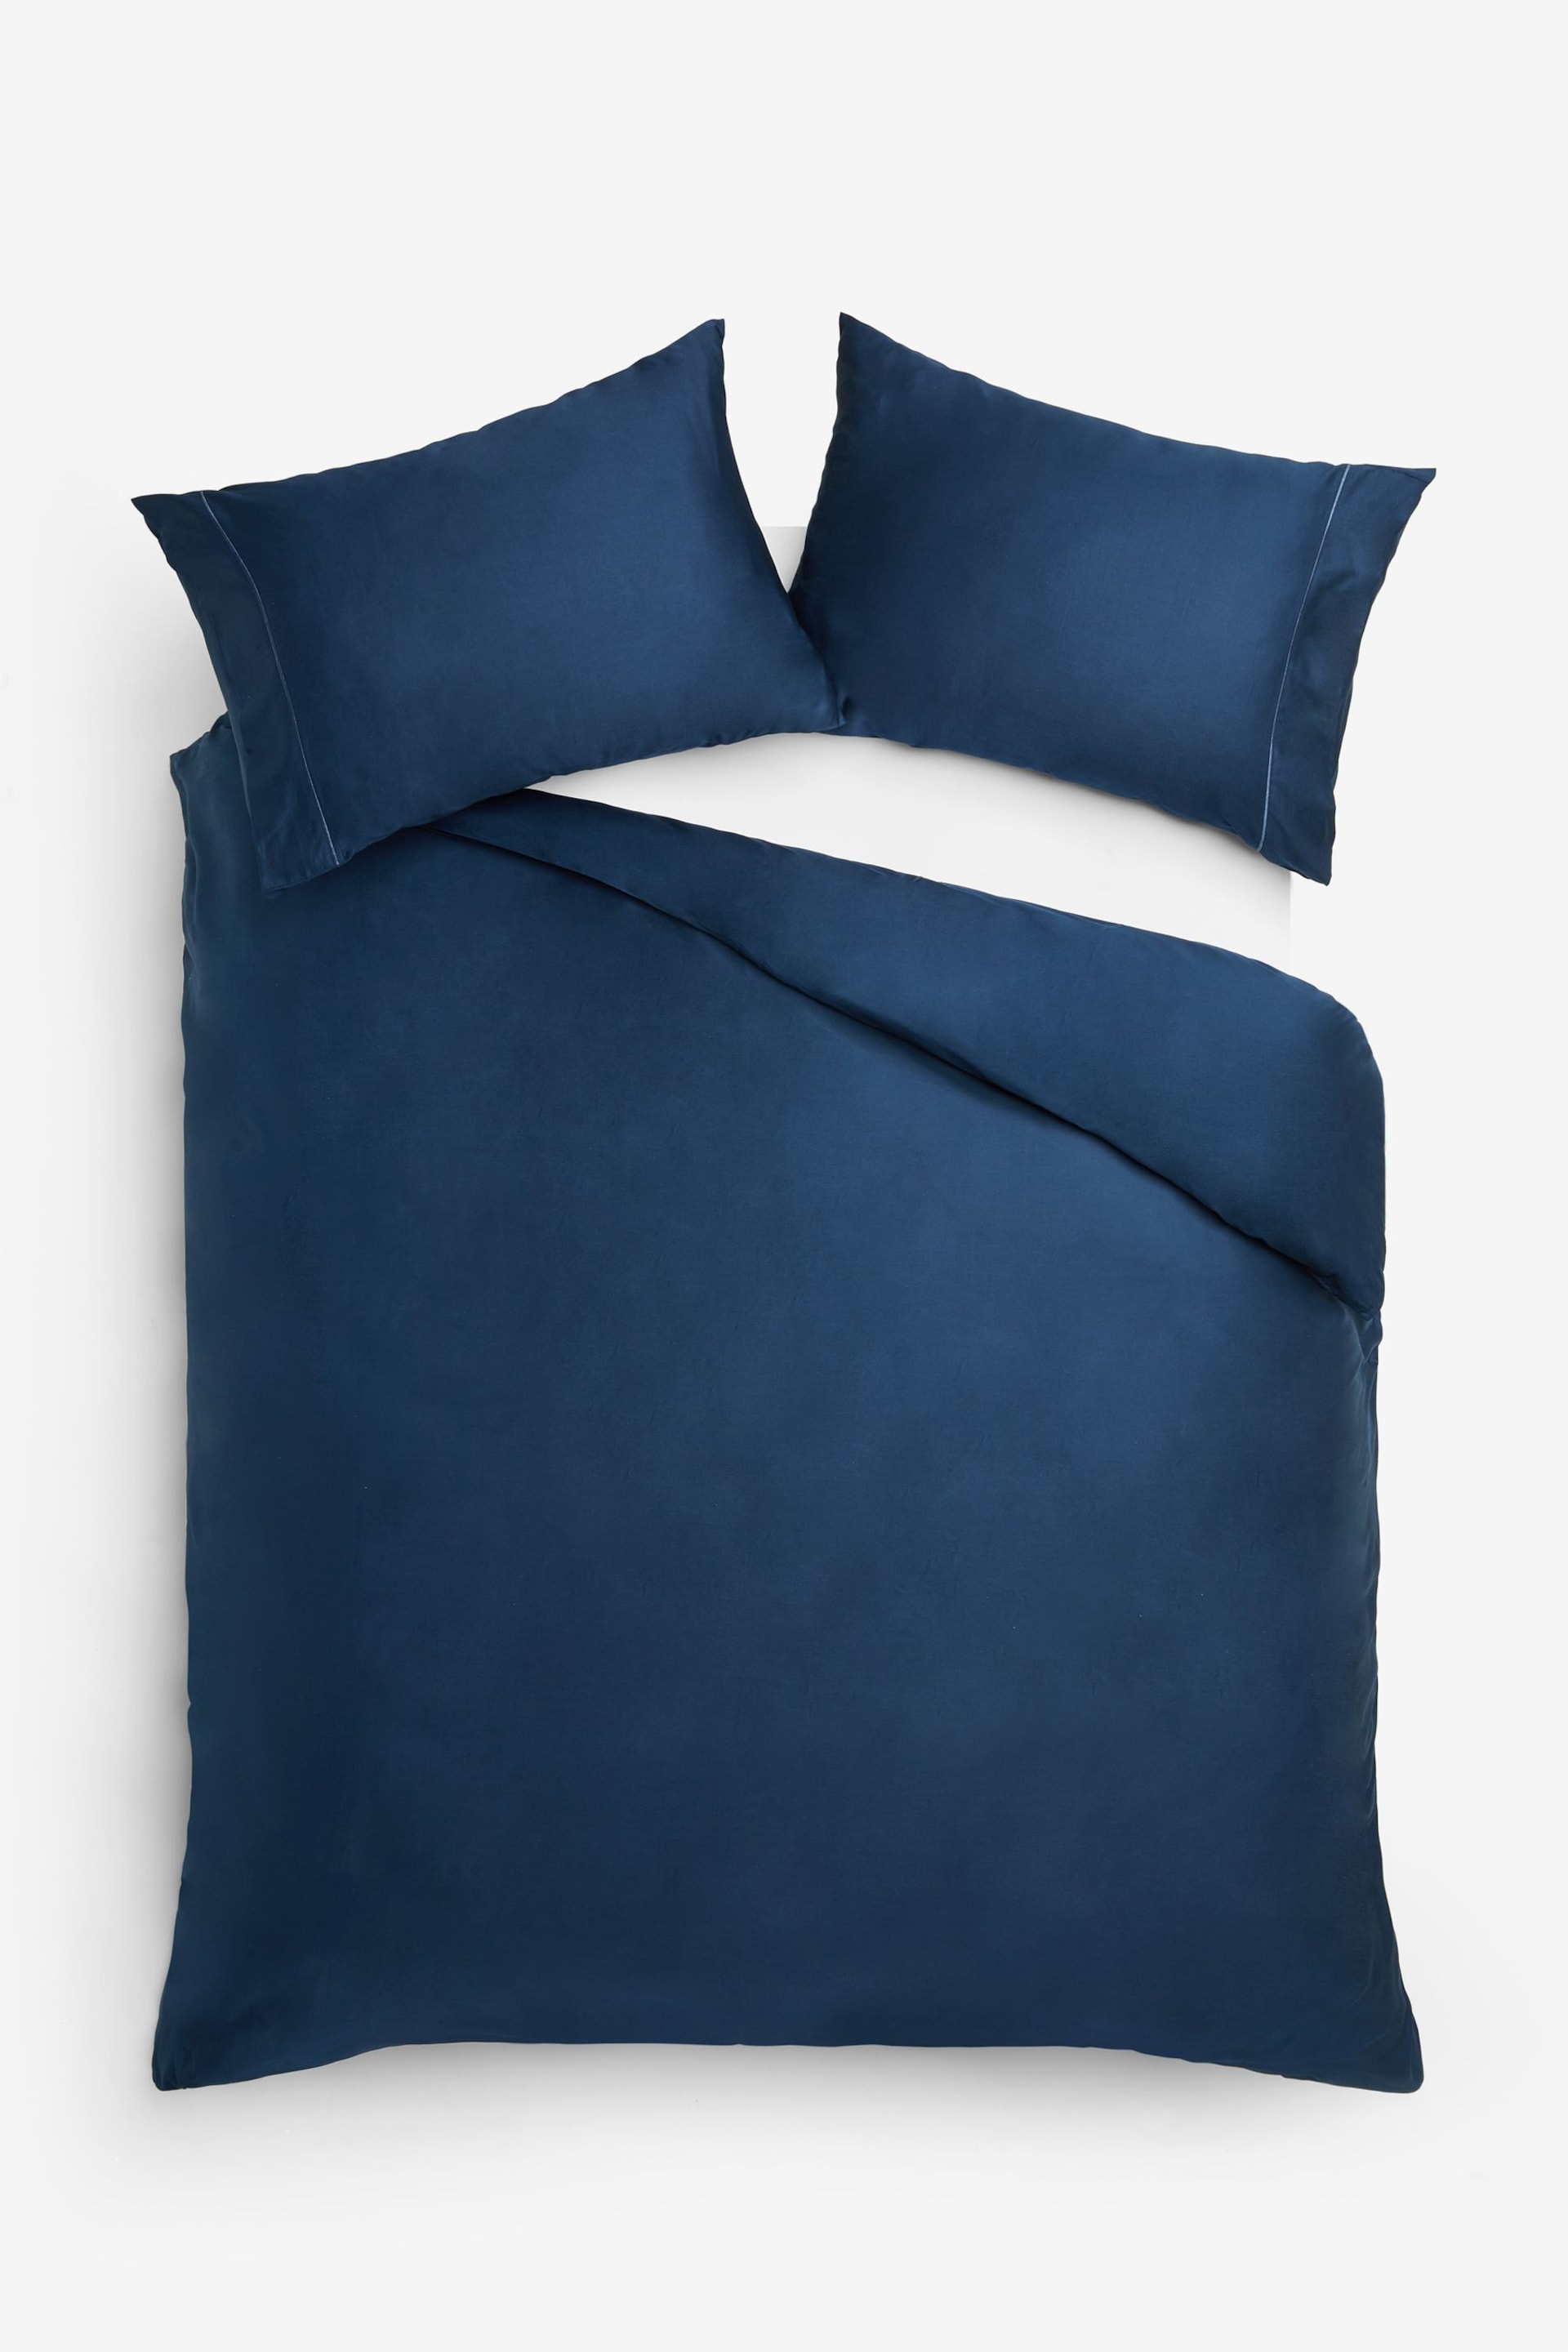 Navy Collection Luxe 300 Thread Count 100% Cotton Sateen Satin Stitch Duvet Cover And Pillowcase Set - Image 5 of 7